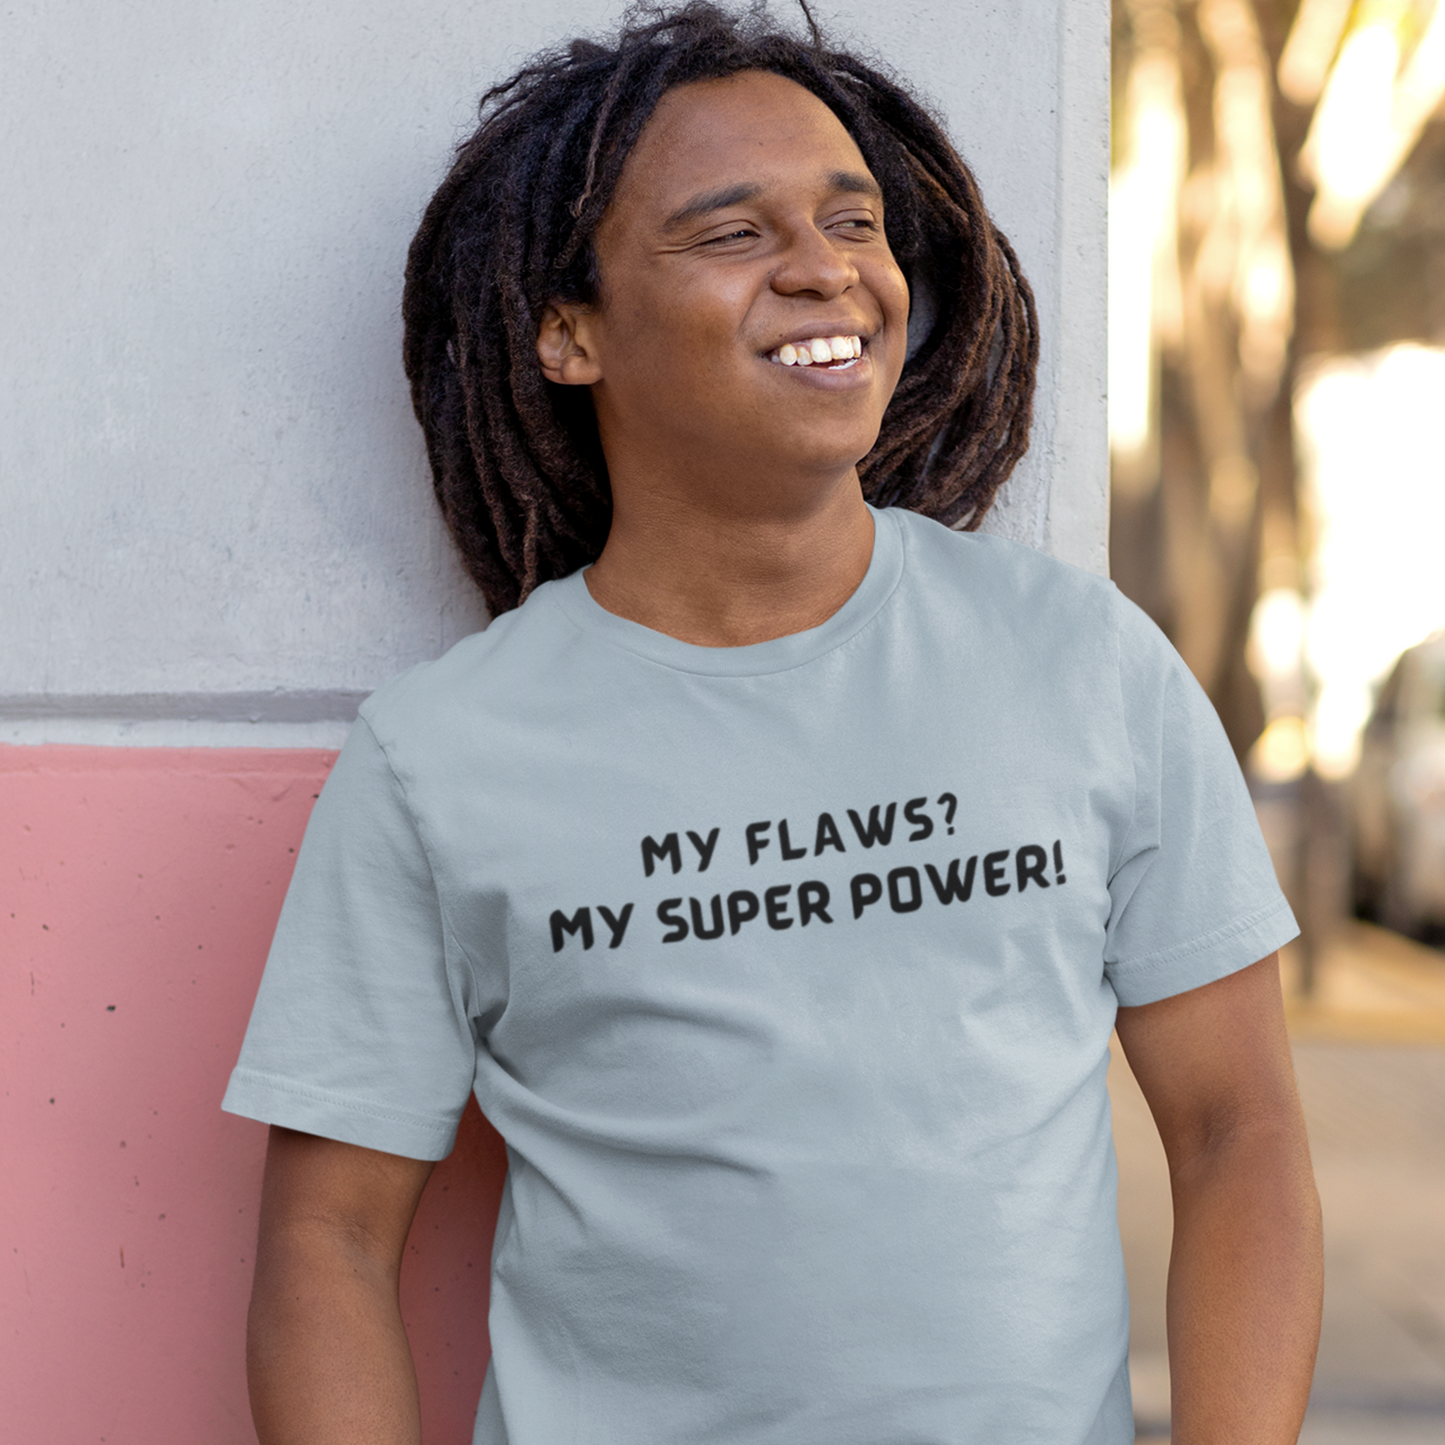 My flaws? My super power! unisex tshirt gift, T shirt with inspirational quotes